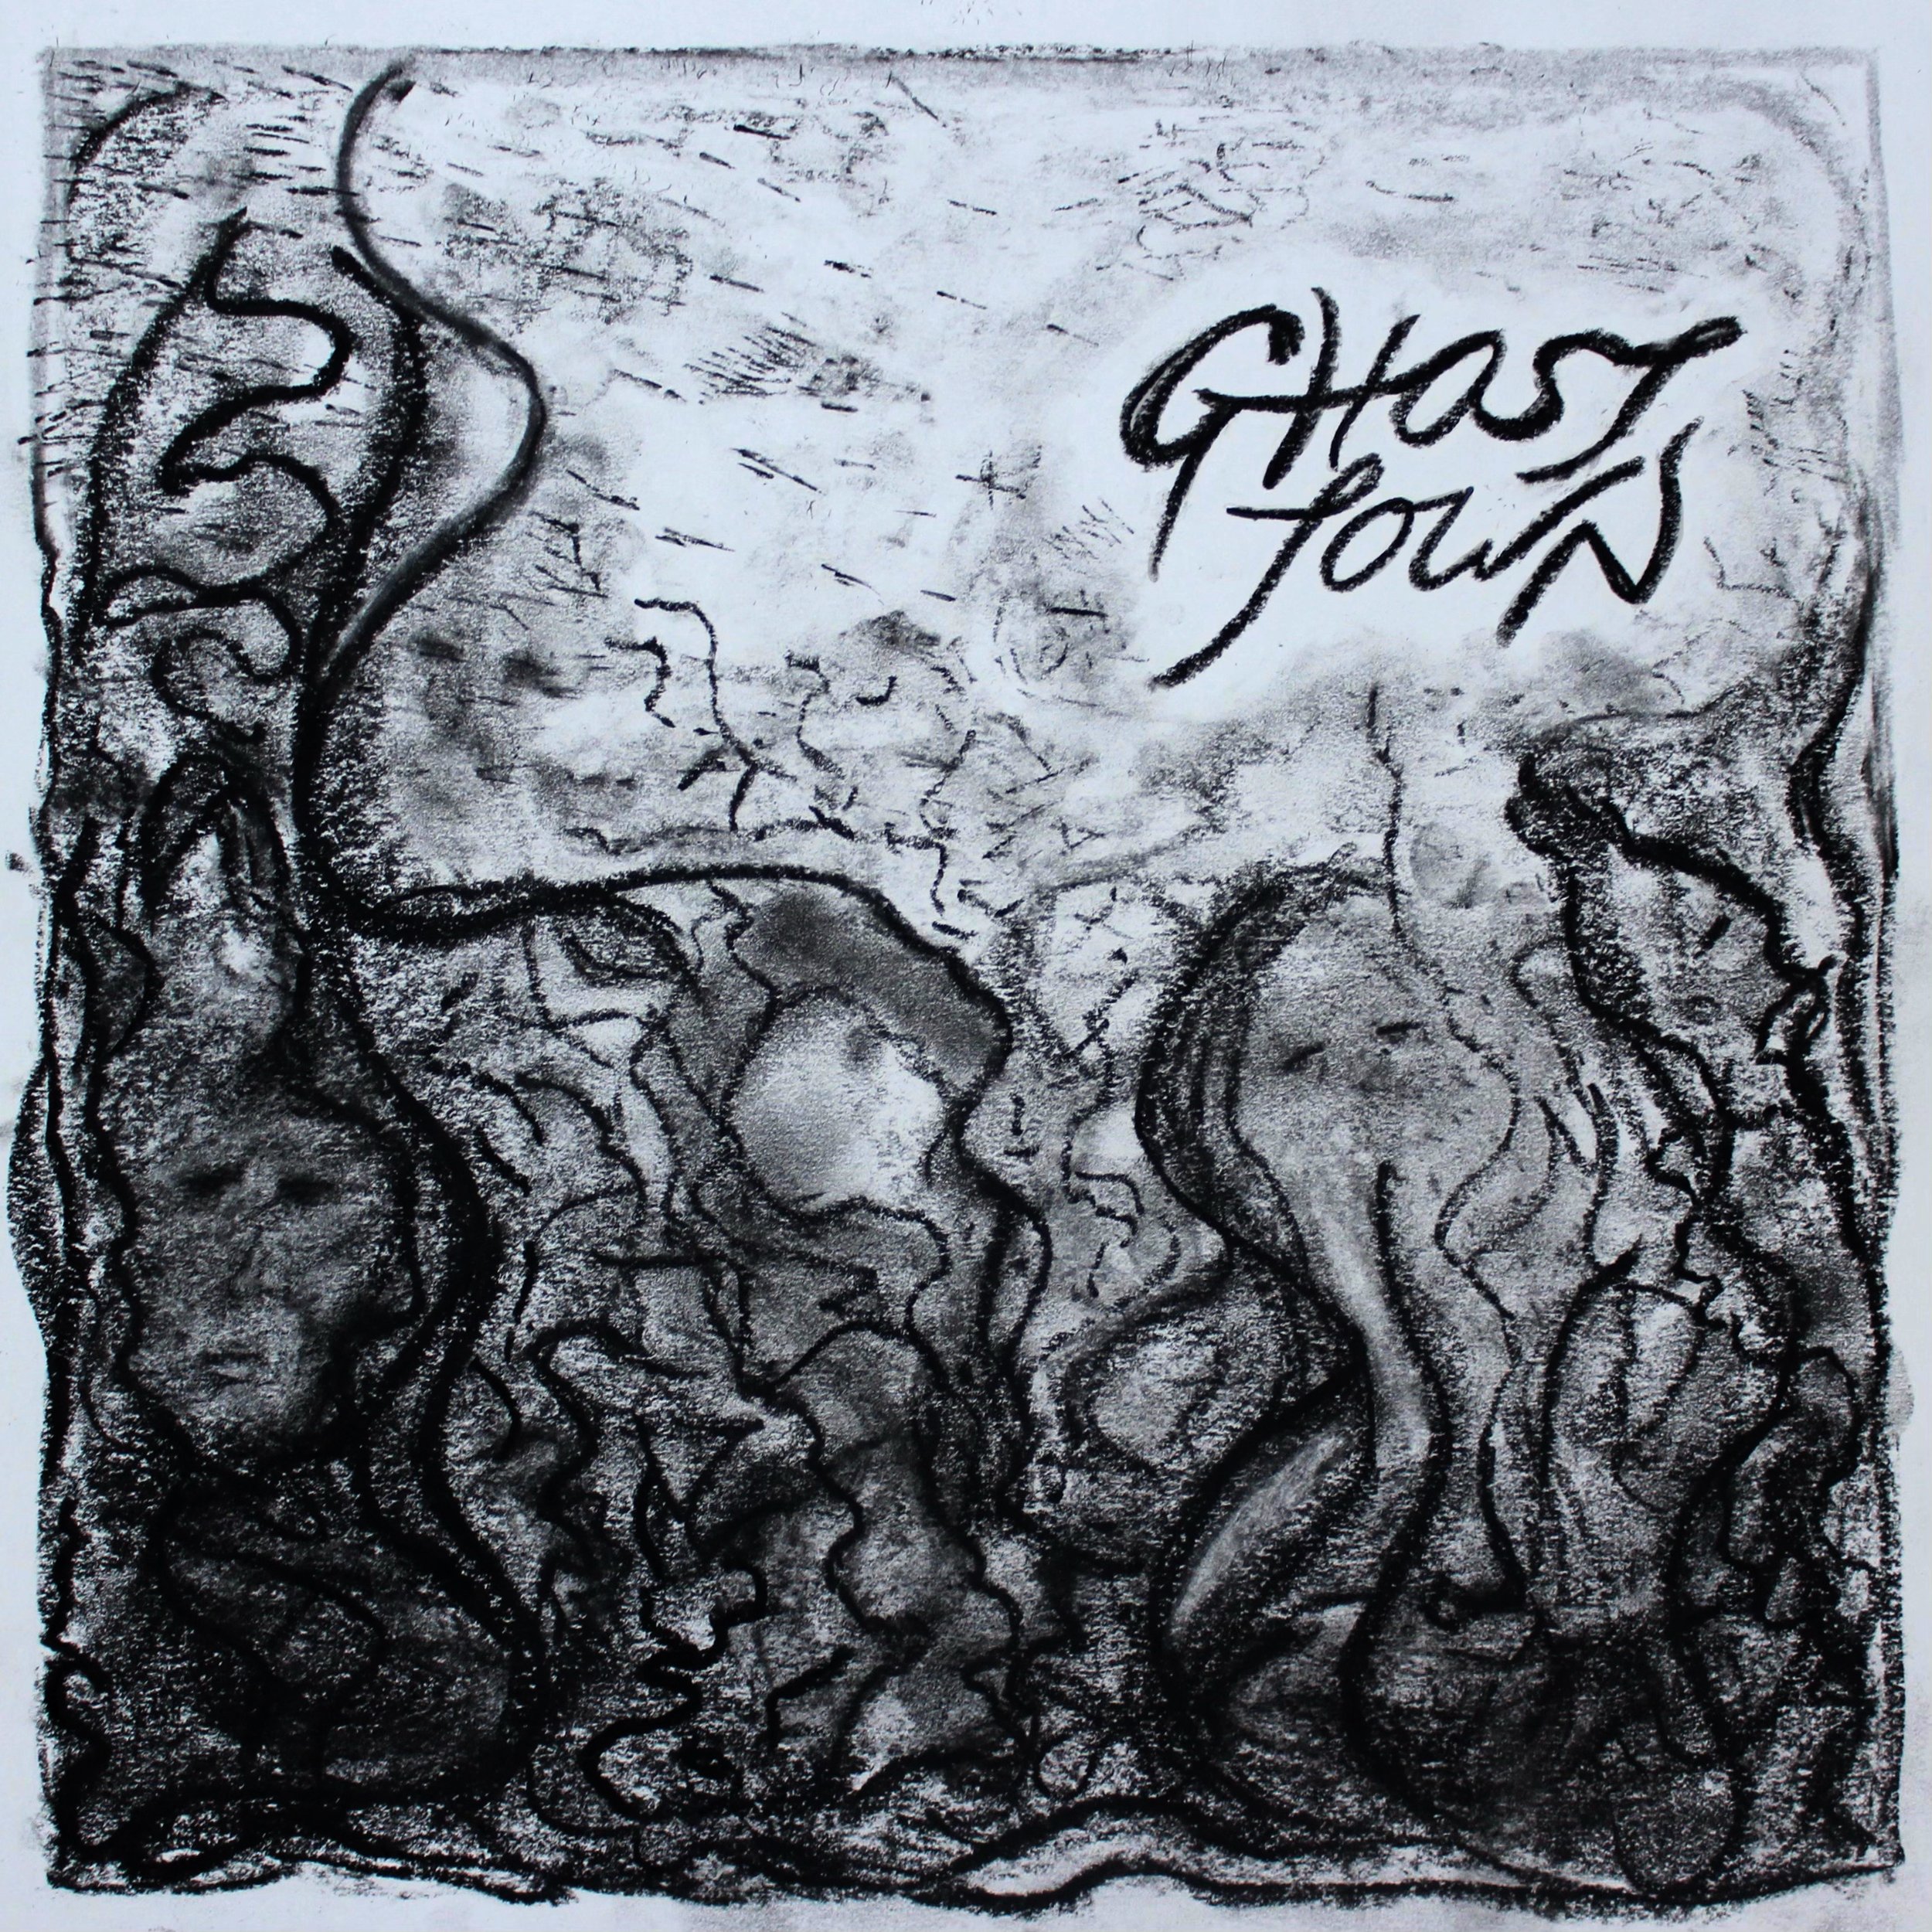 Album cover for concept album of "Ghost Town: The Musical"